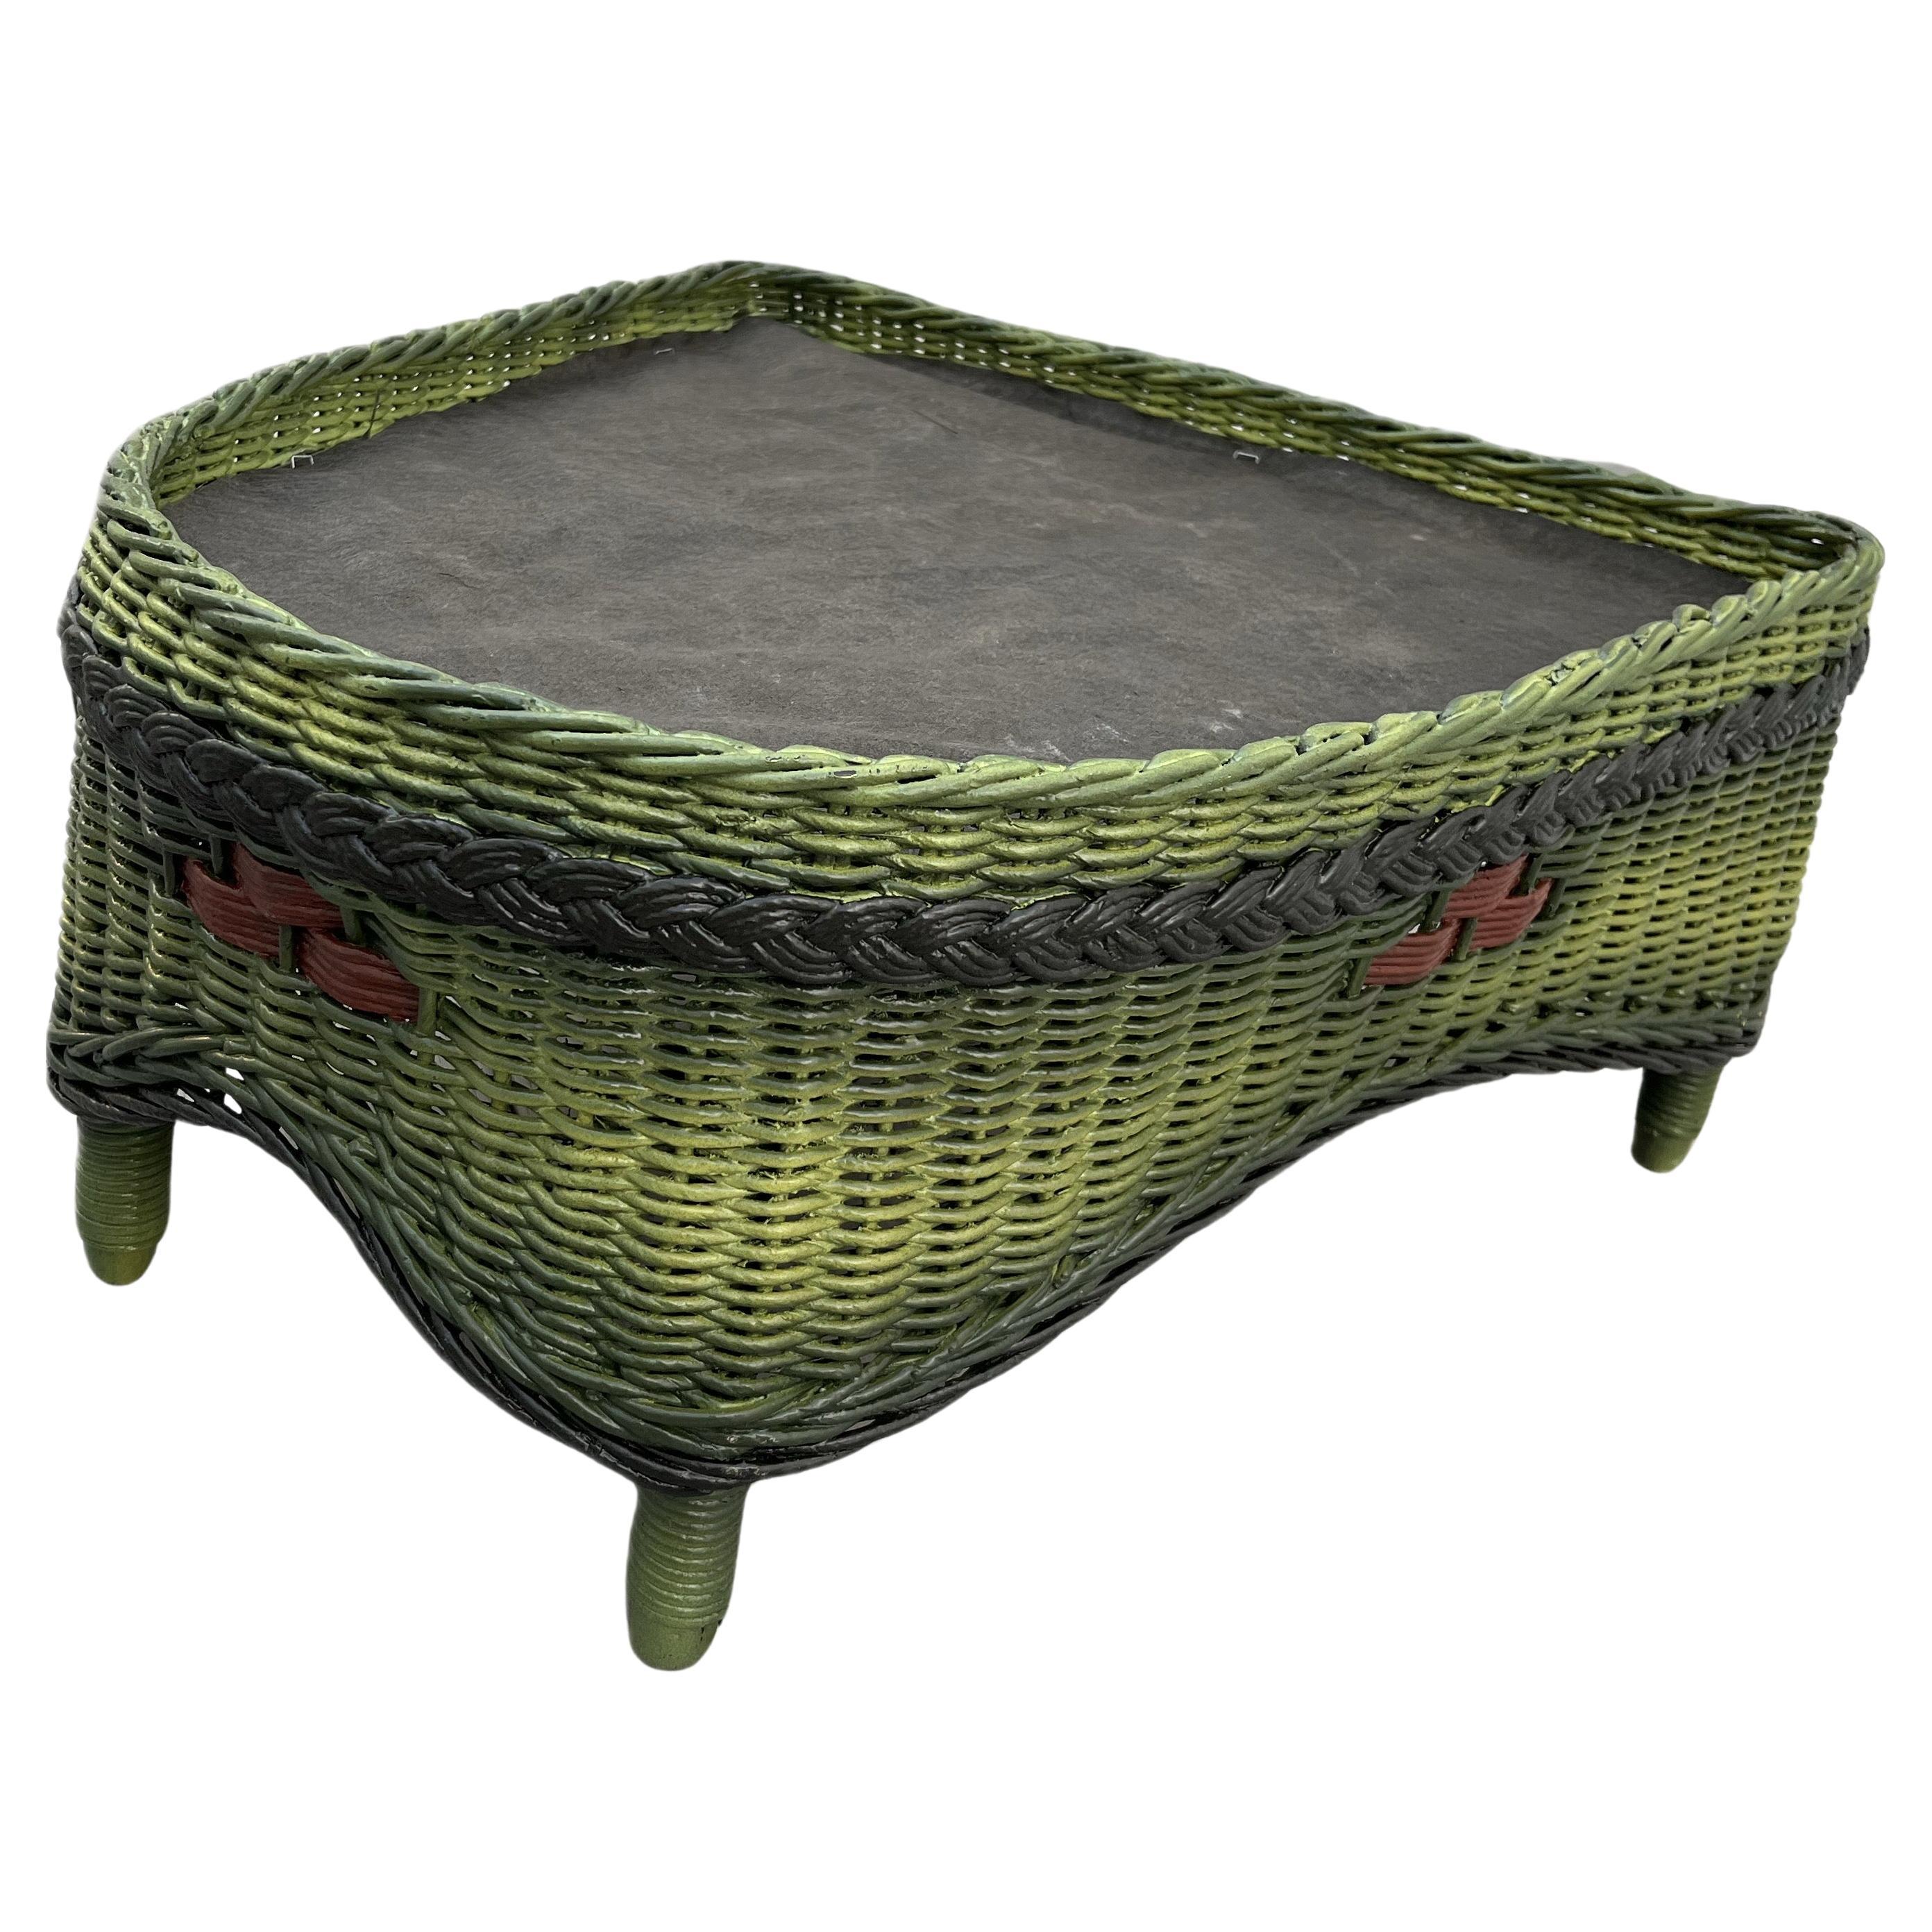 A Close Woven Wicker Ottoman in French Green Finish with Colored Accents